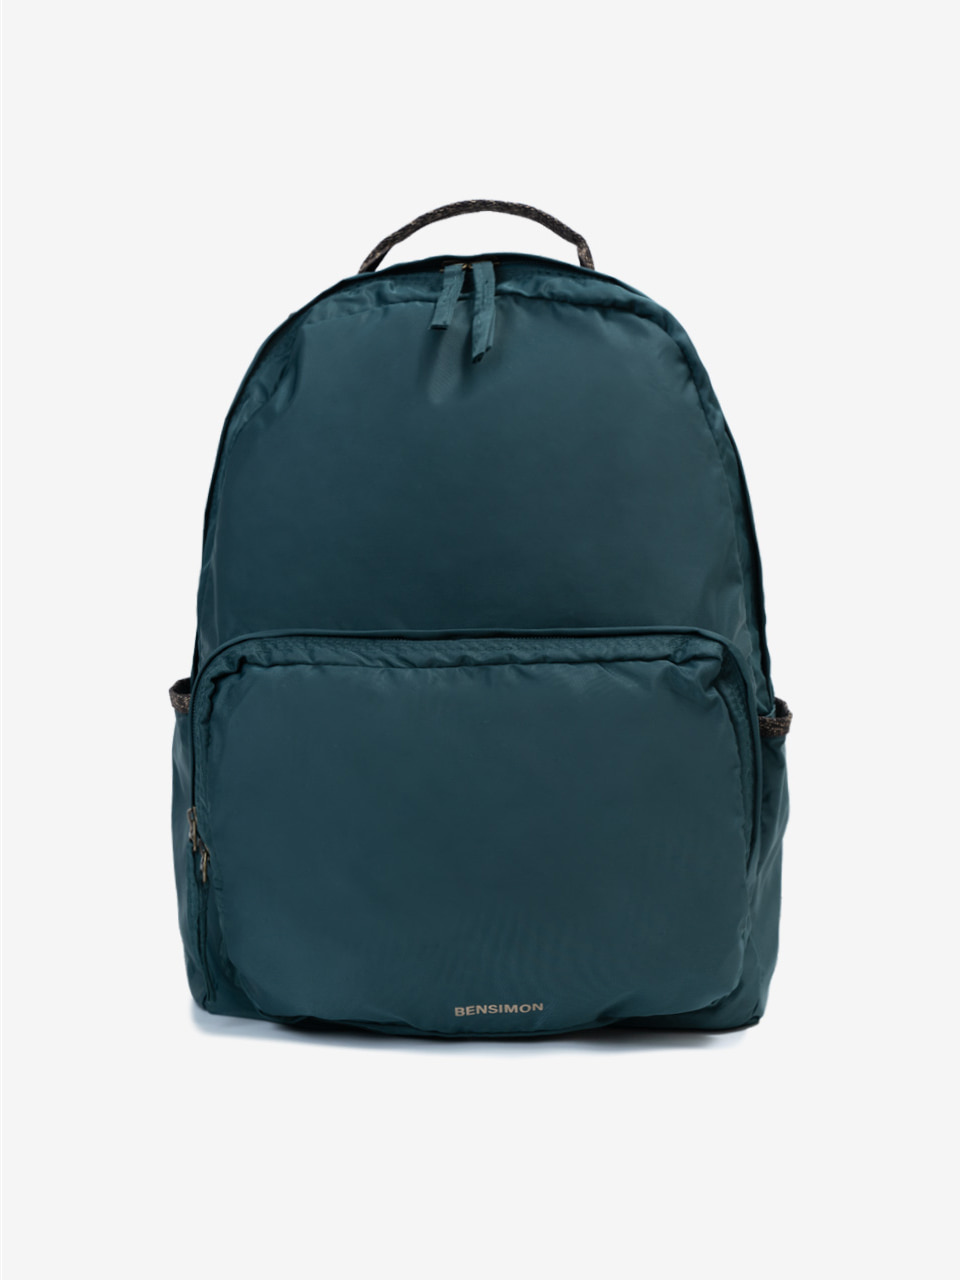 [PARIS COLLECTION] BACKPACK - VERT ANGLAIS